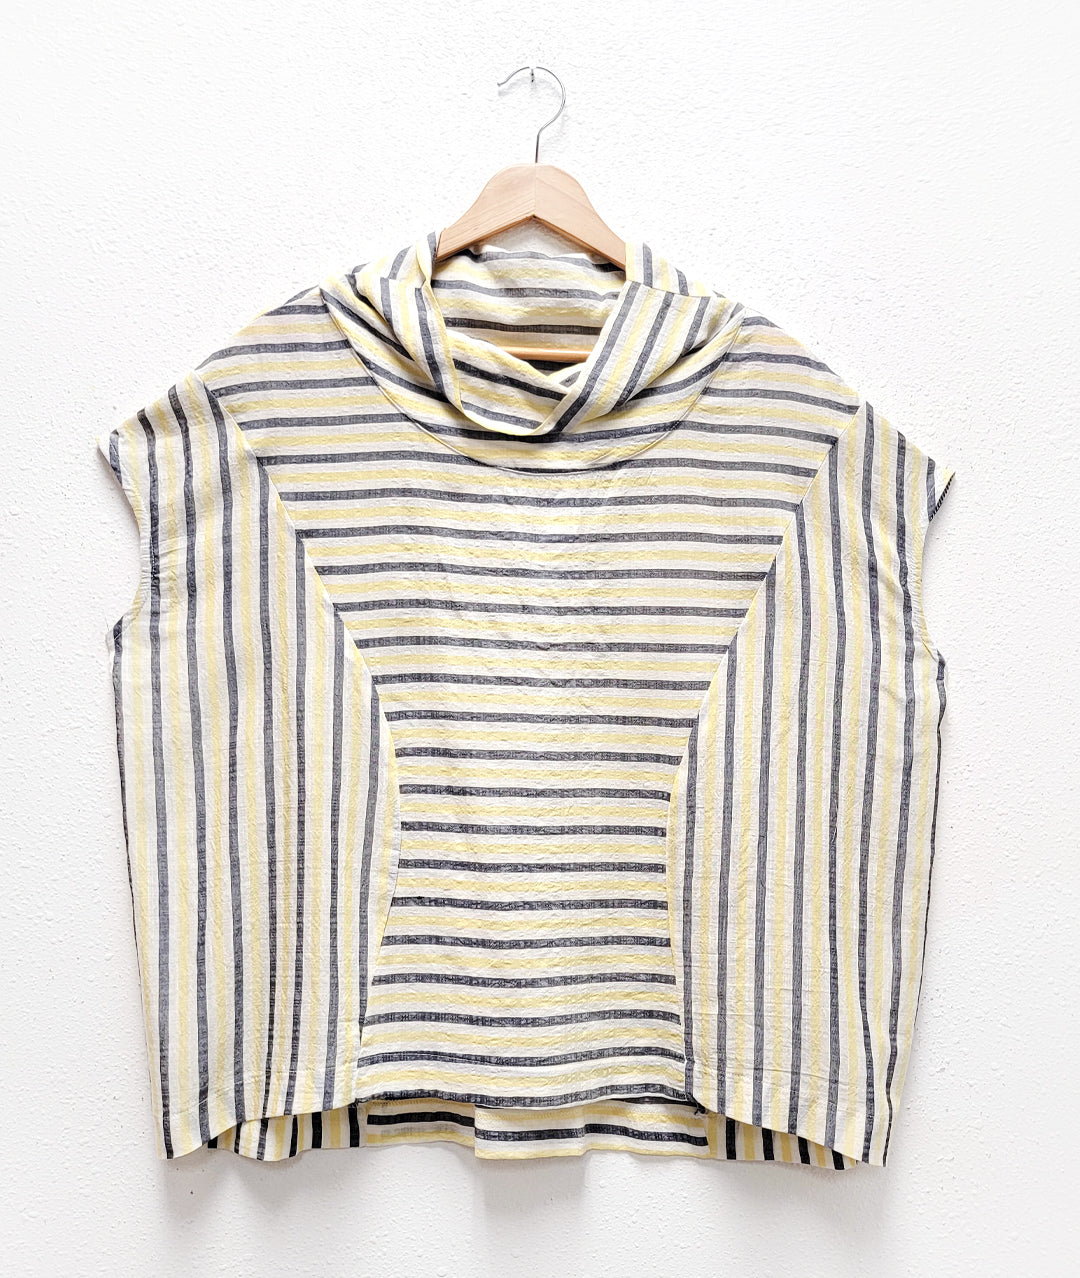 grey, white, and yellow wide striped top with a cowl neck, cap sleeves and princess seams